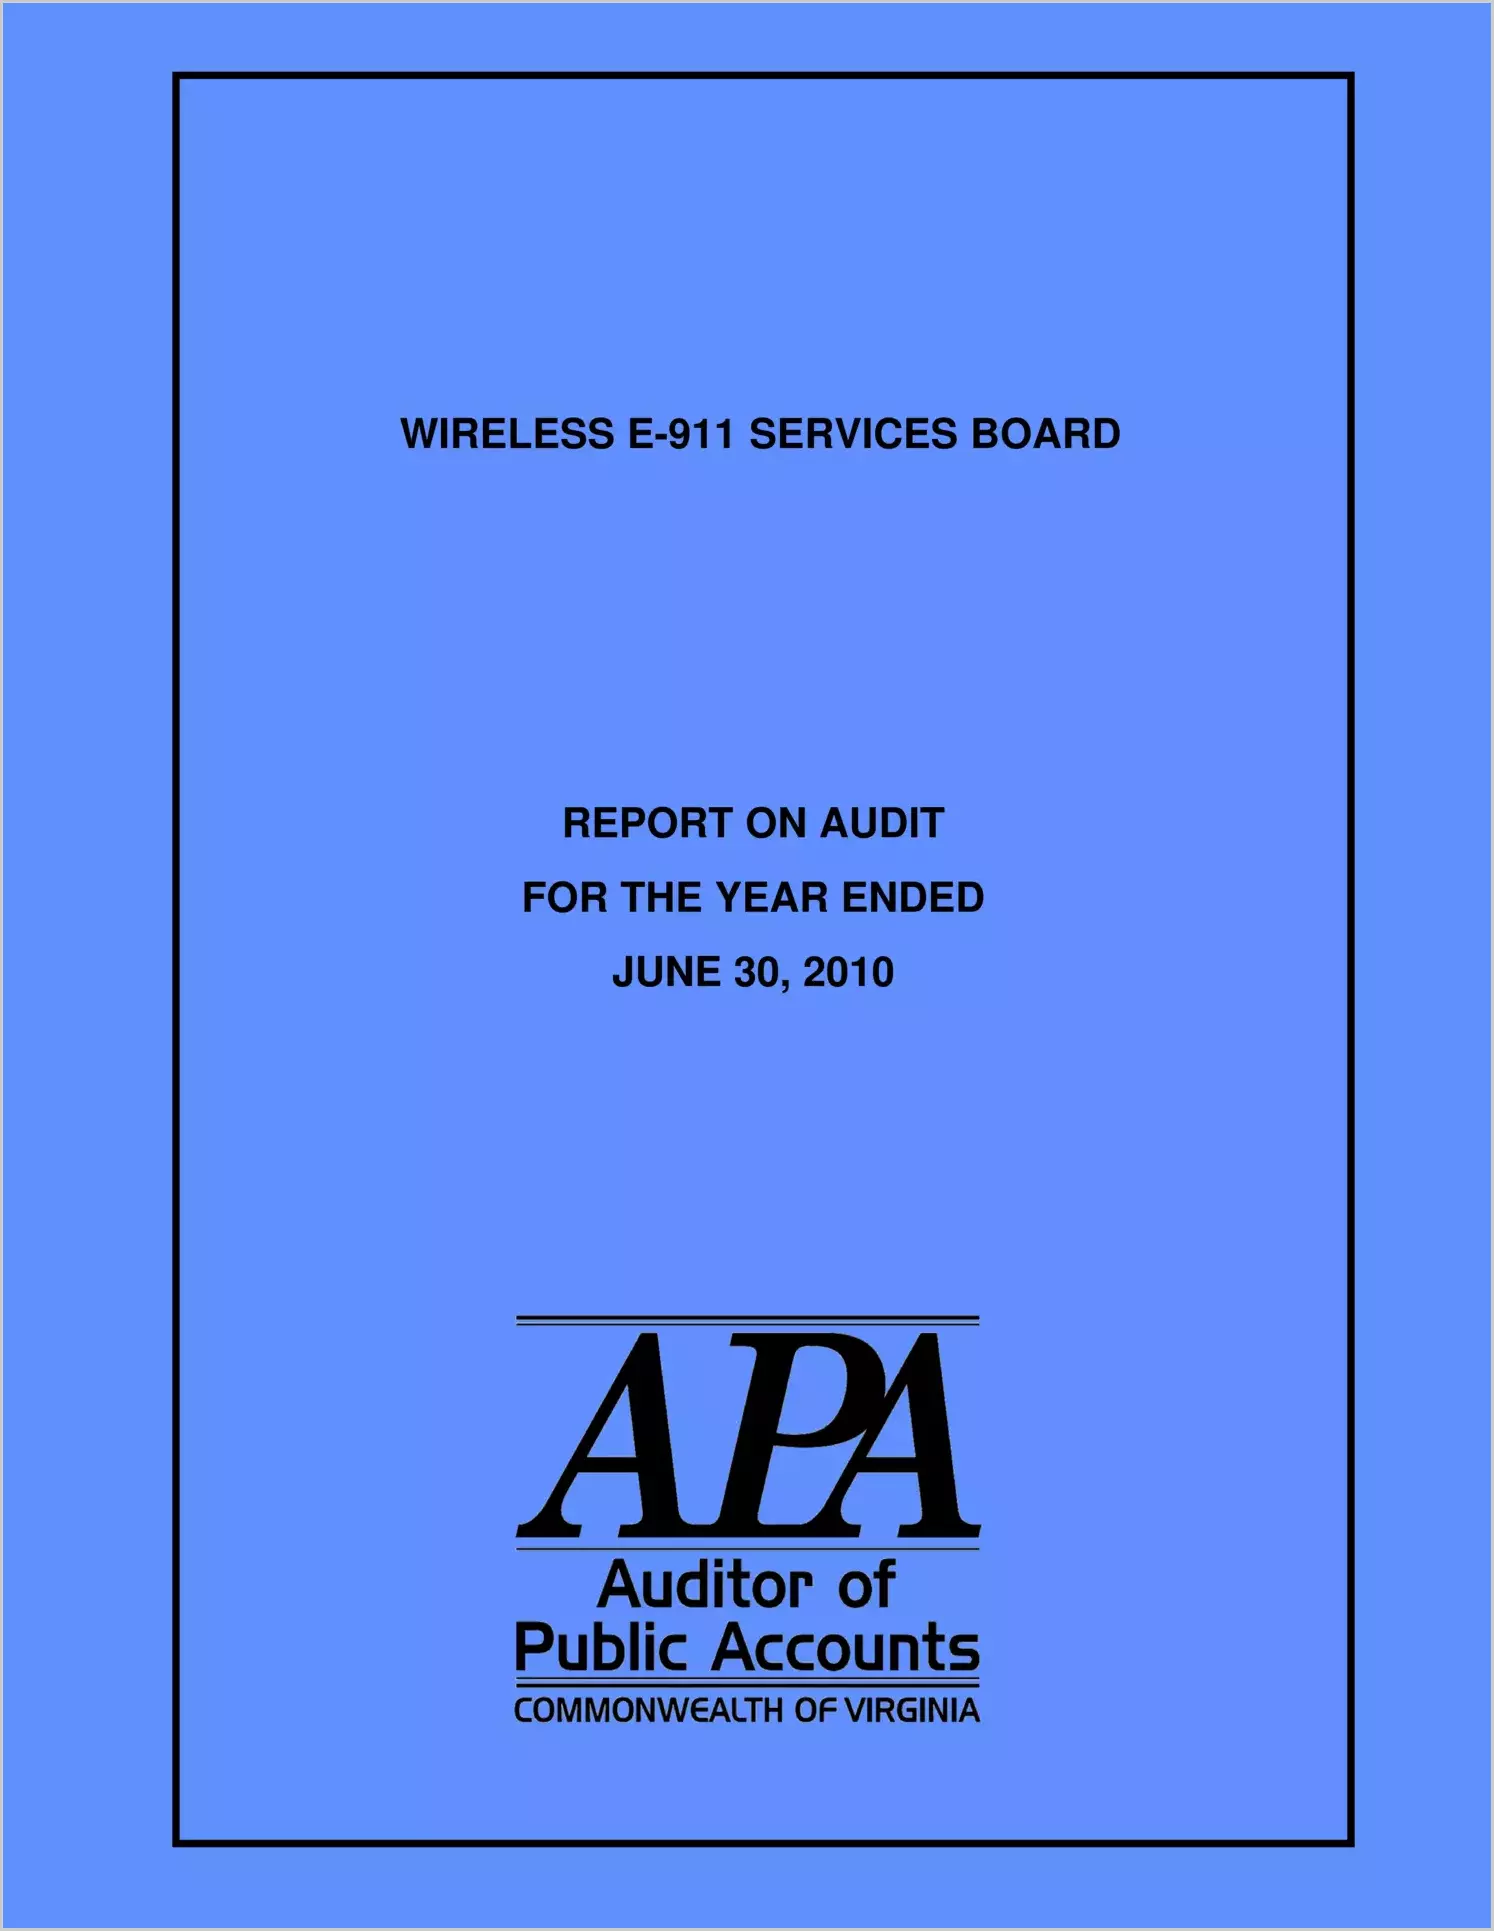 Wireless E-911 Services Board report on audit for the year ended June 30, 2010